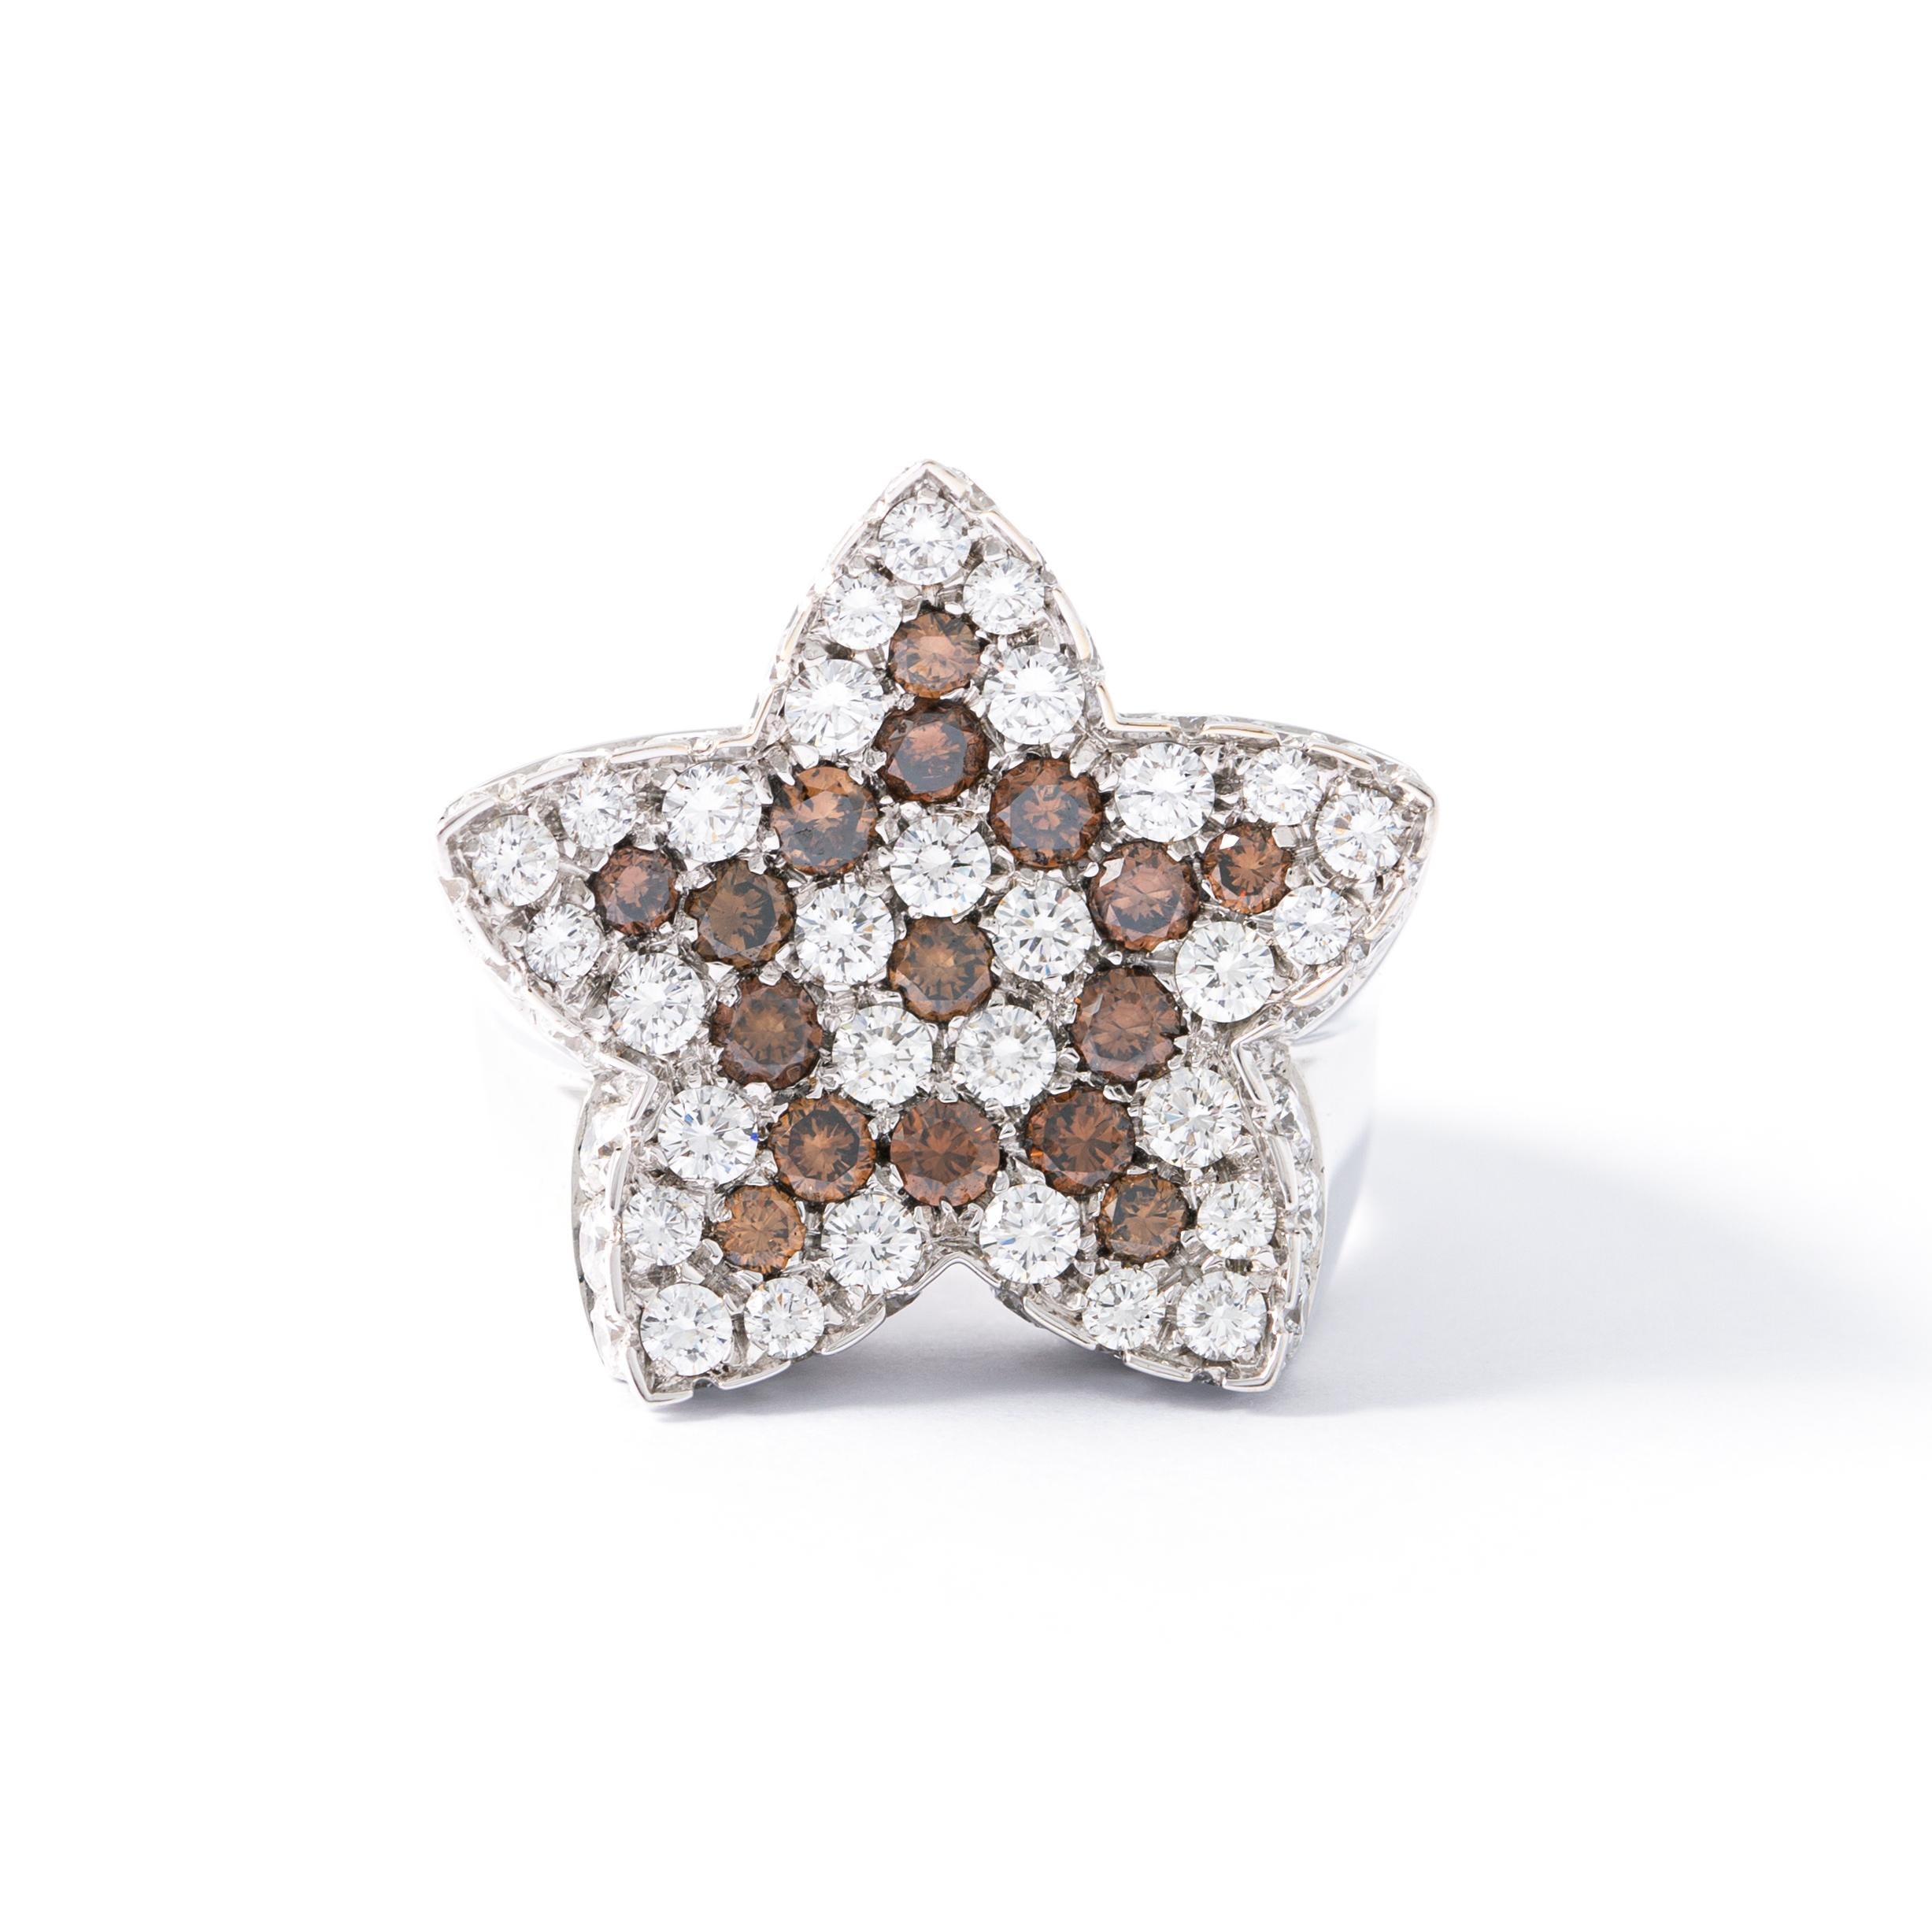 Ring in 18kt white gold set with 60 diamonds 2.14 cts and 16 brown diamonds 0.91 cts Size 55              

Total weight: 17,85 grams